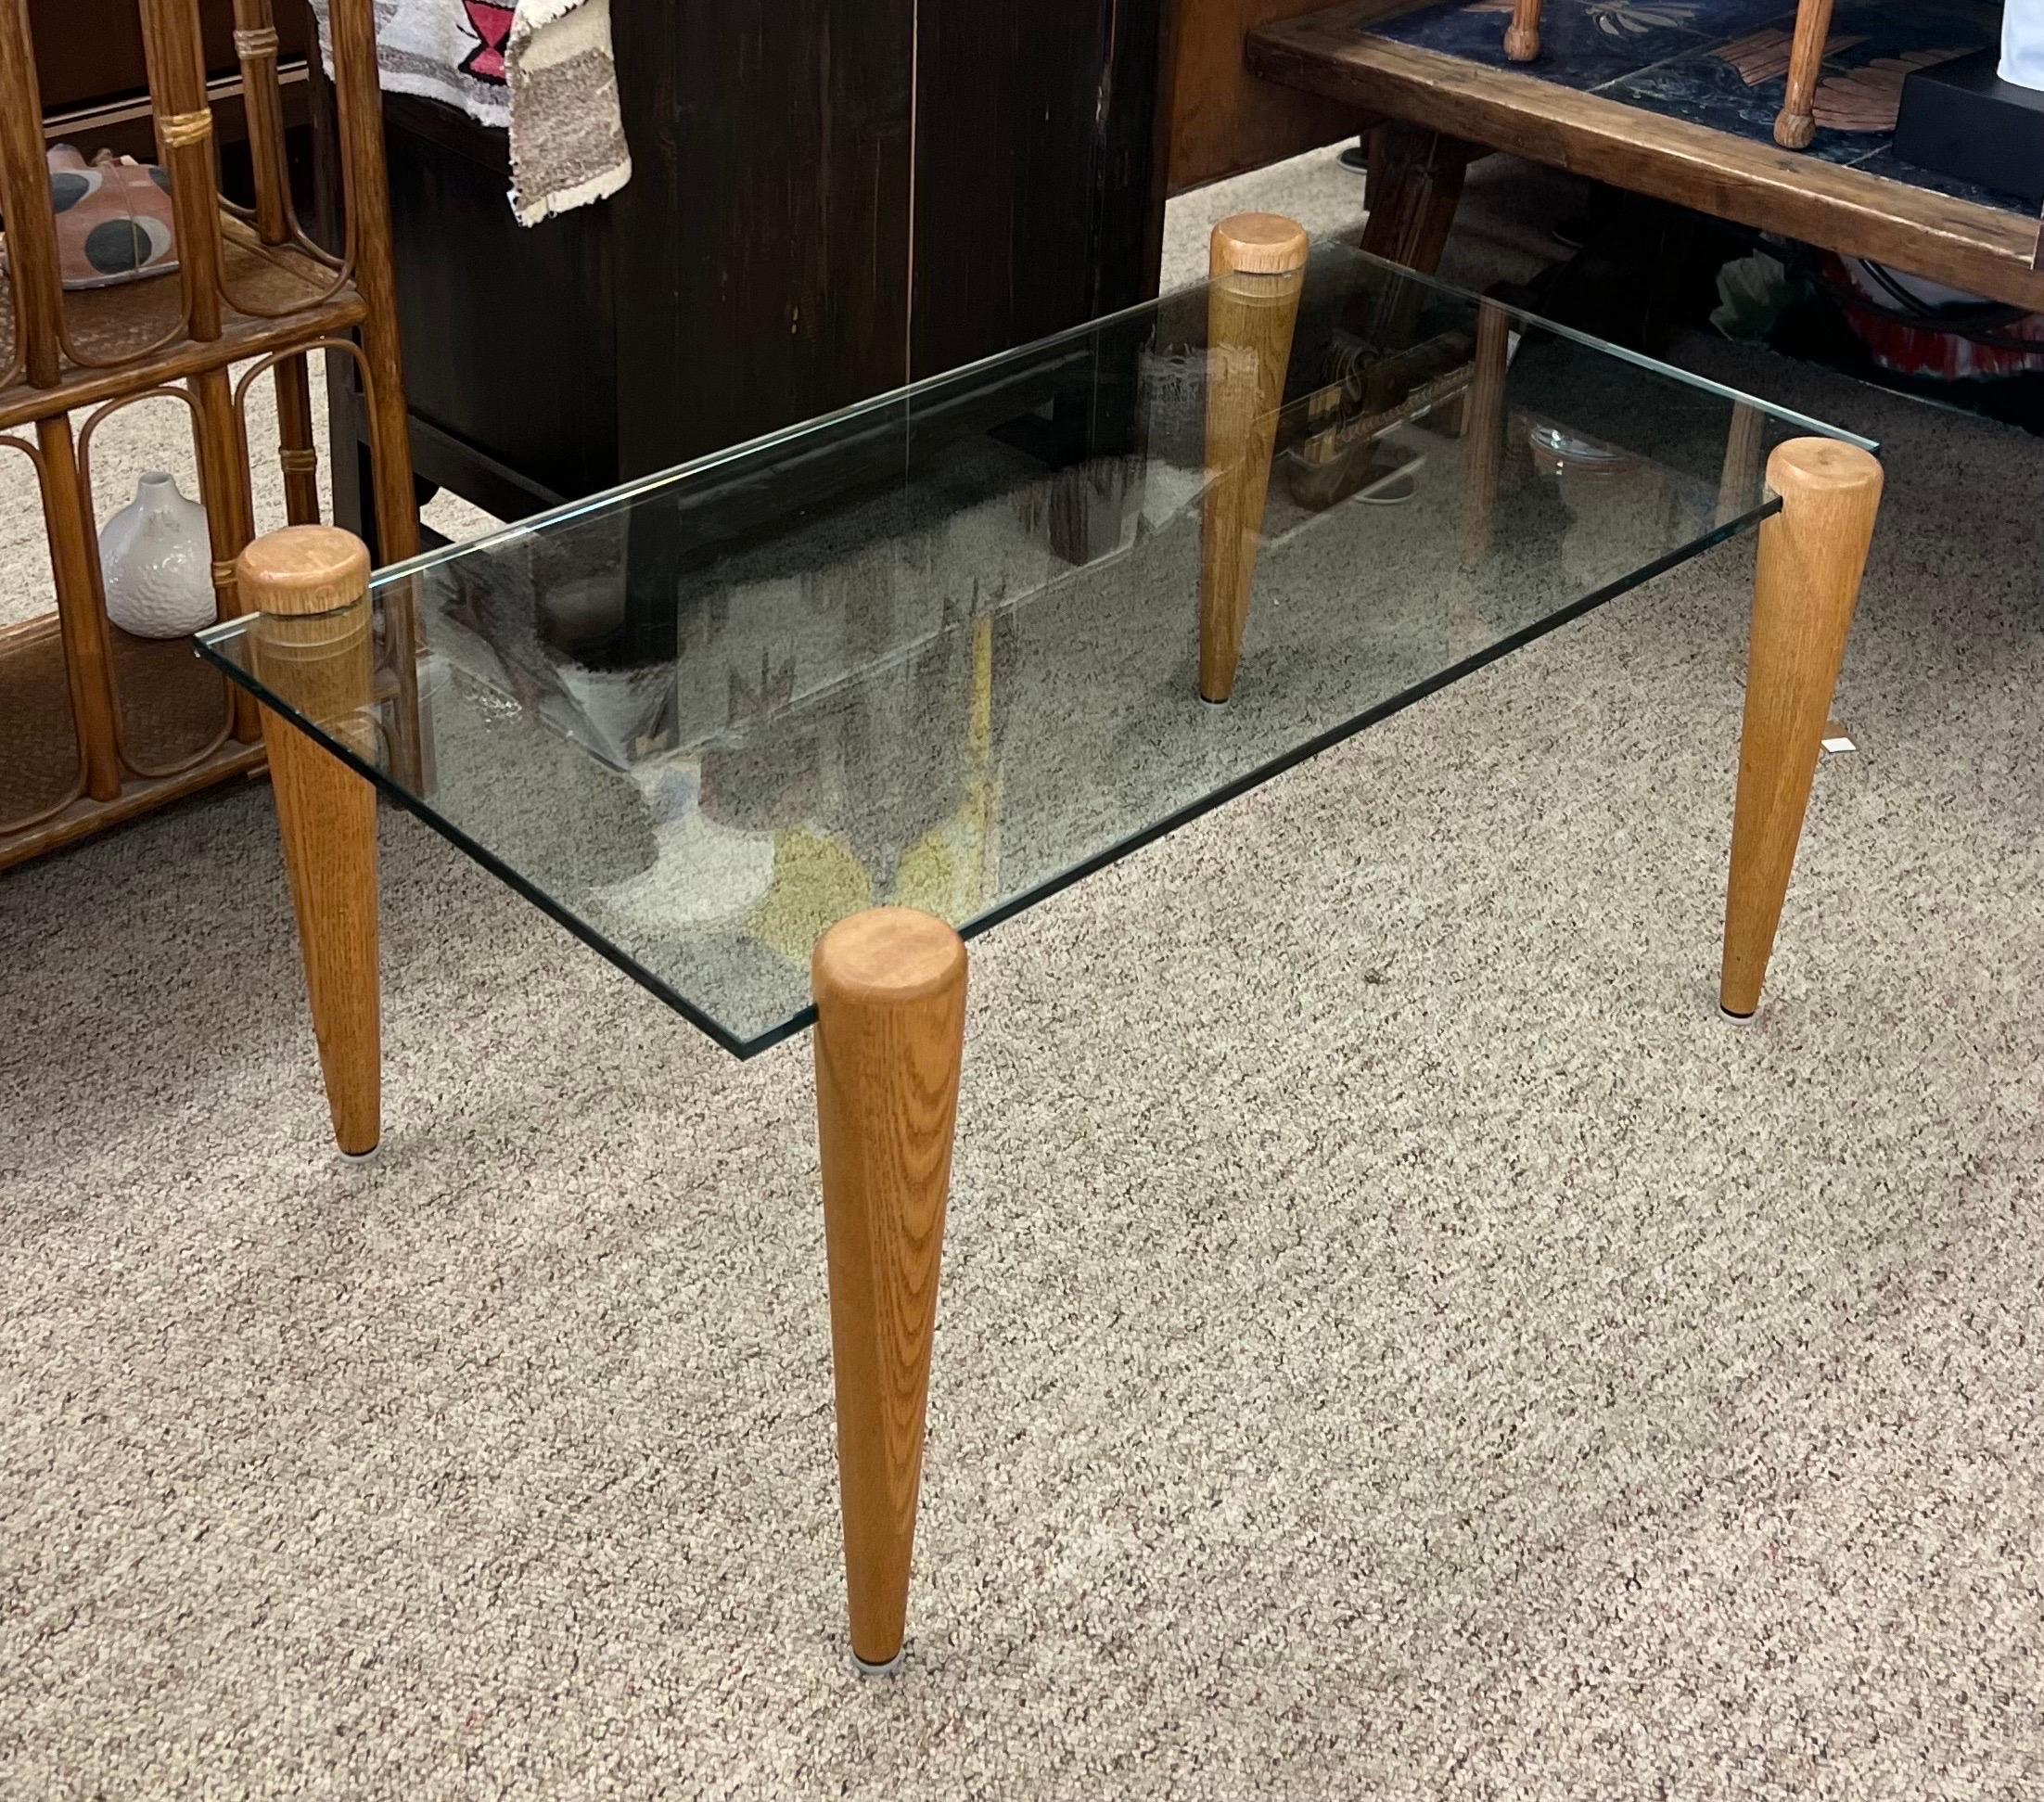 Vintage Mid-Century Modern Coffee Table with Glass Top Solid wood Legs

Dimensions. 40 W ; 24 D ; 18 H.